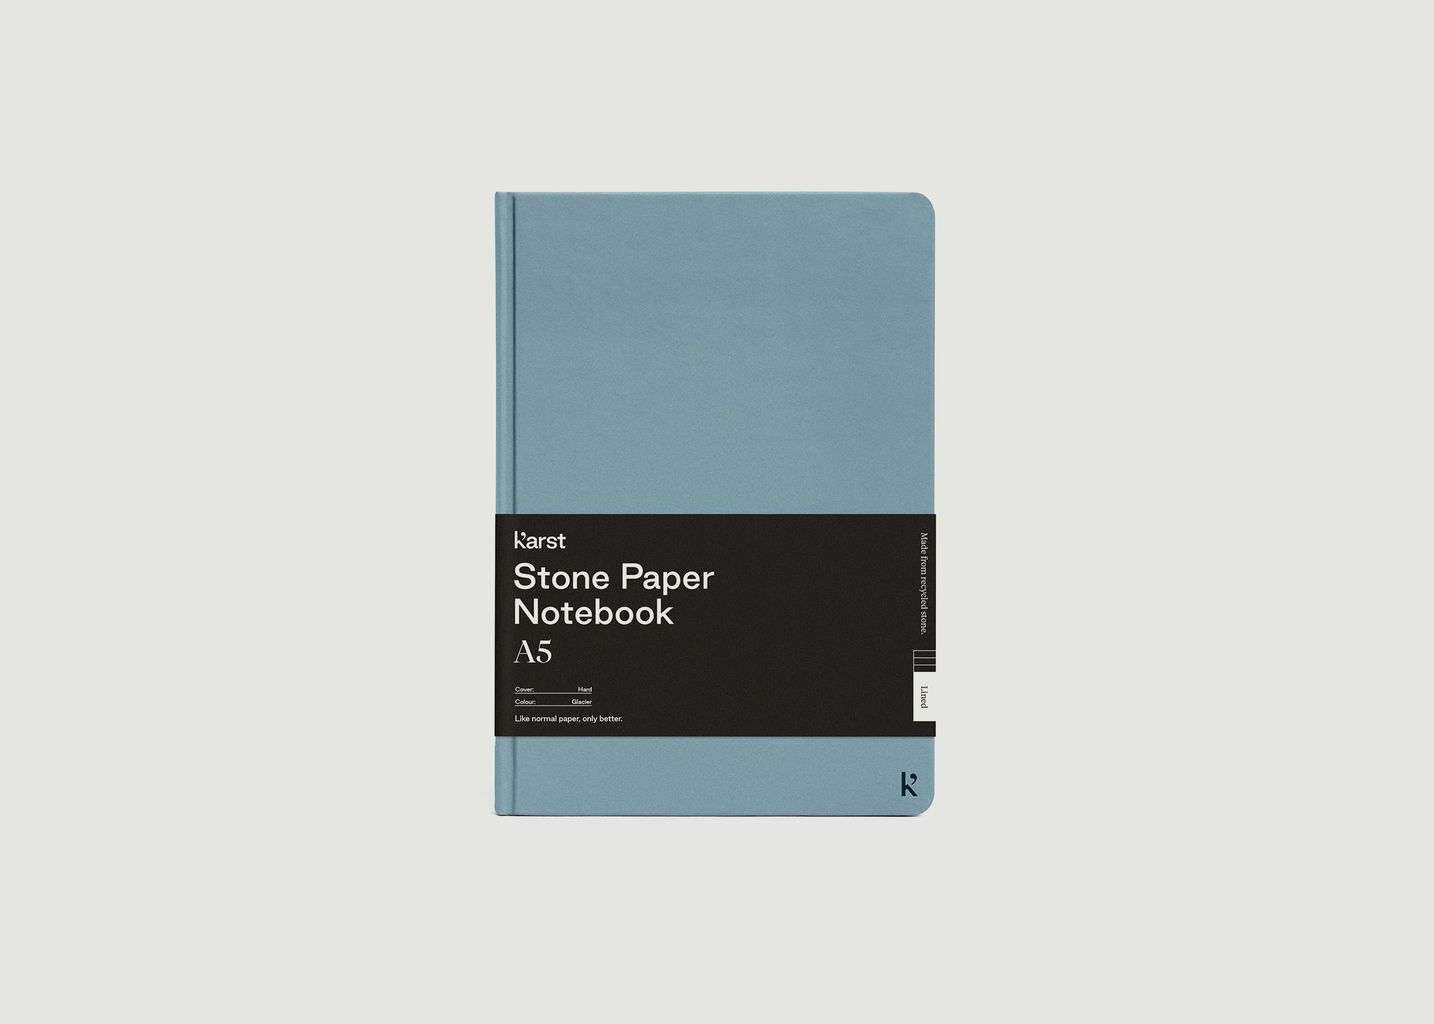 A5 hard cover notebook - Karst Stone Paper